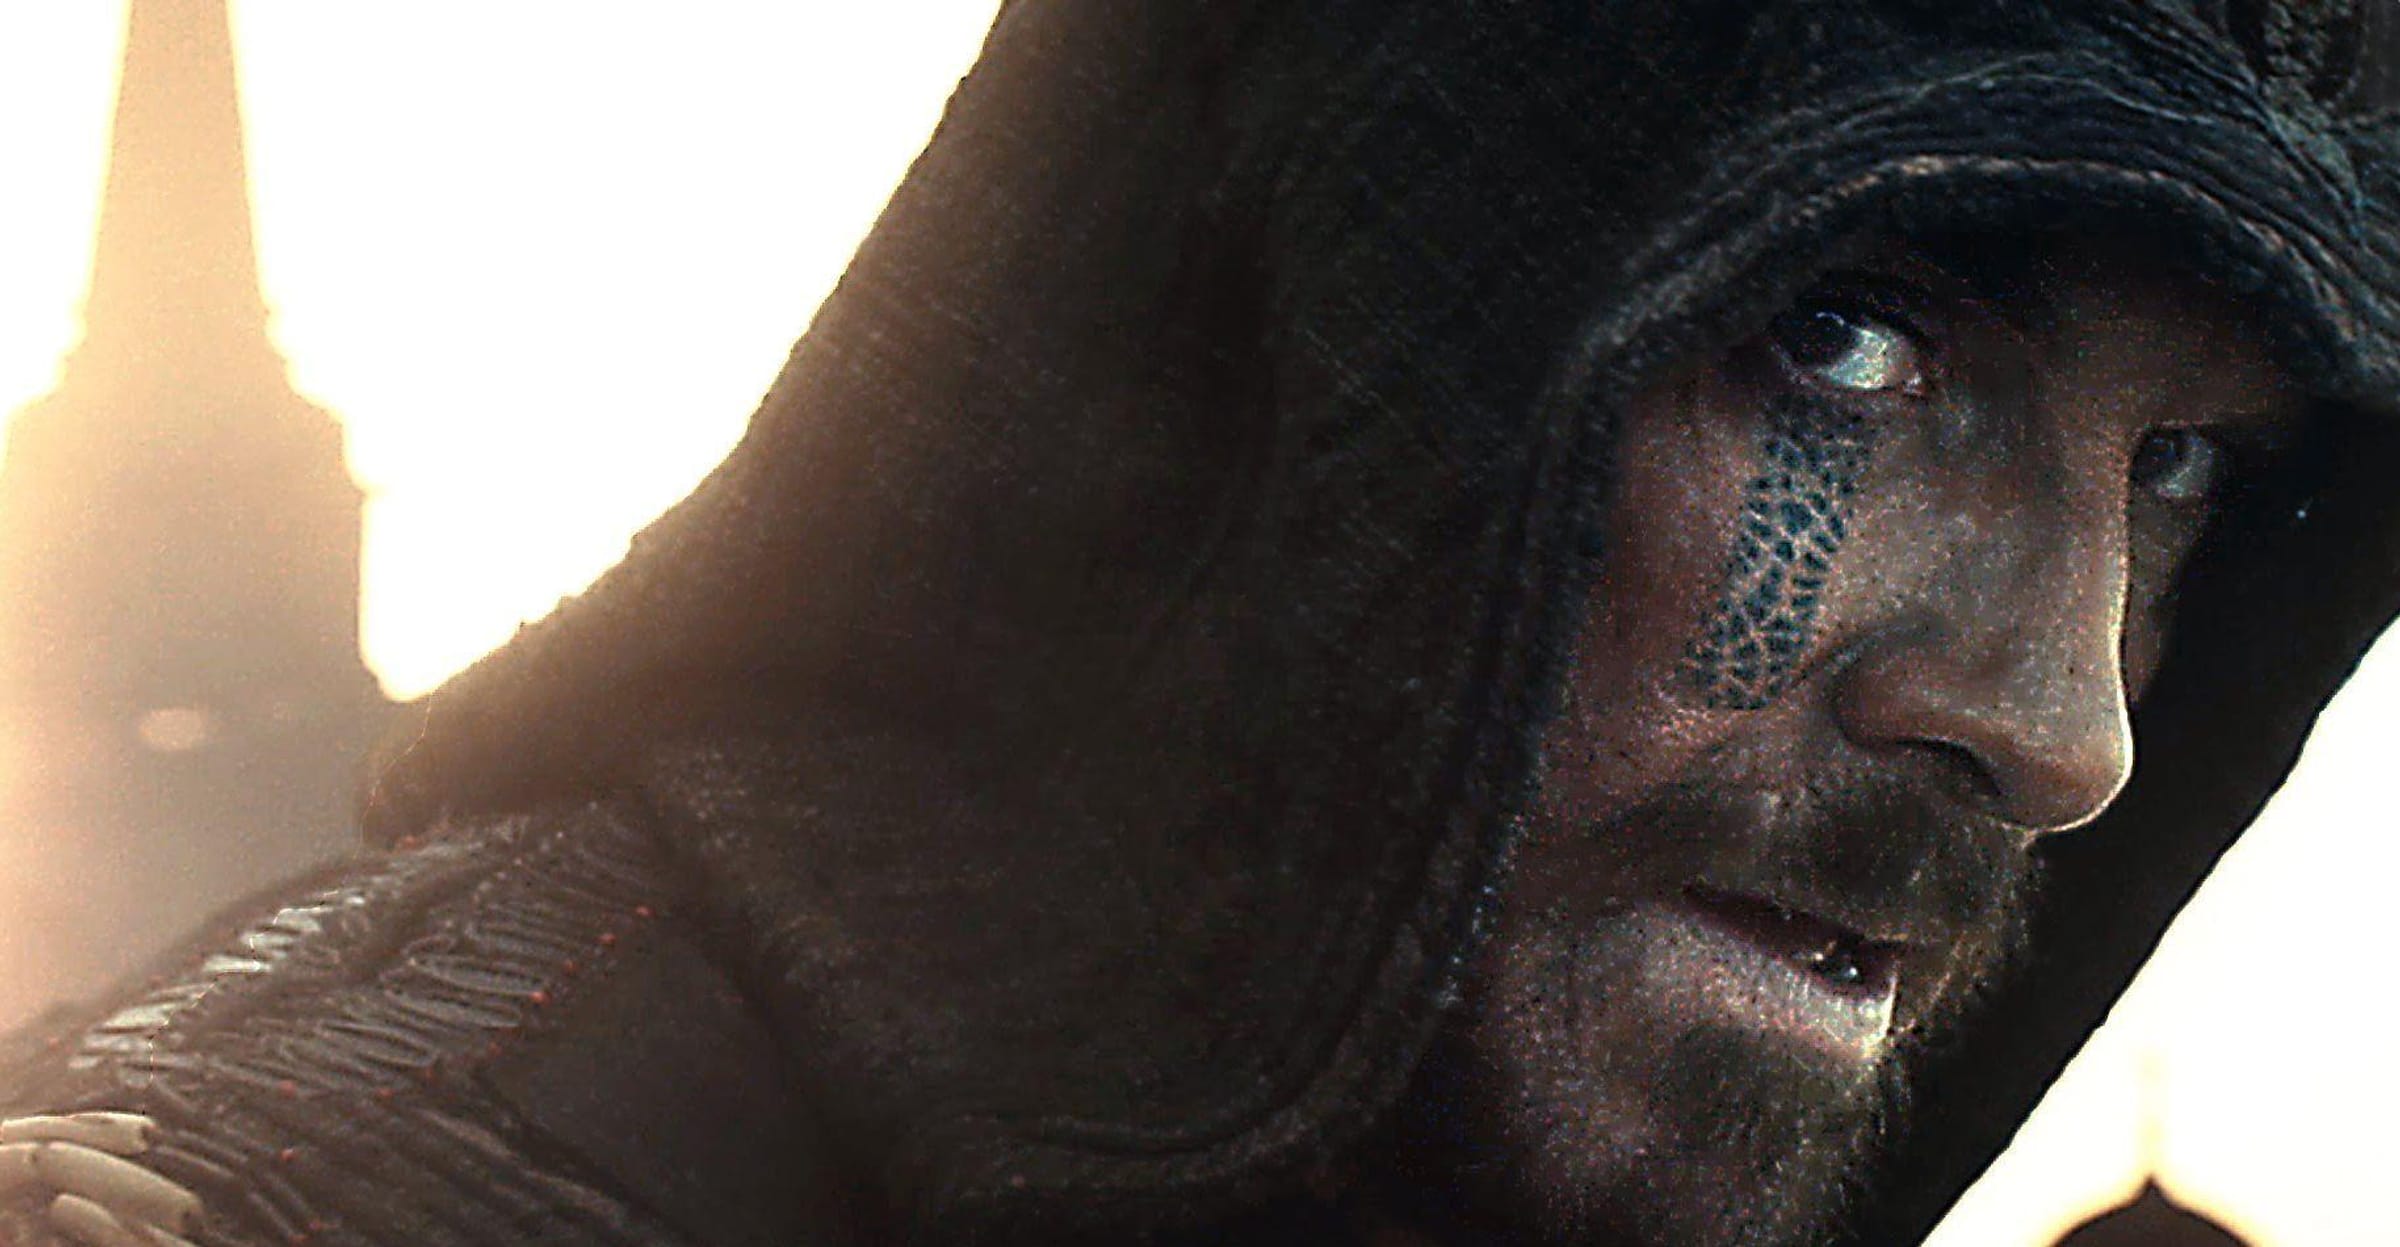 Assassin's Creed Movie Quotes